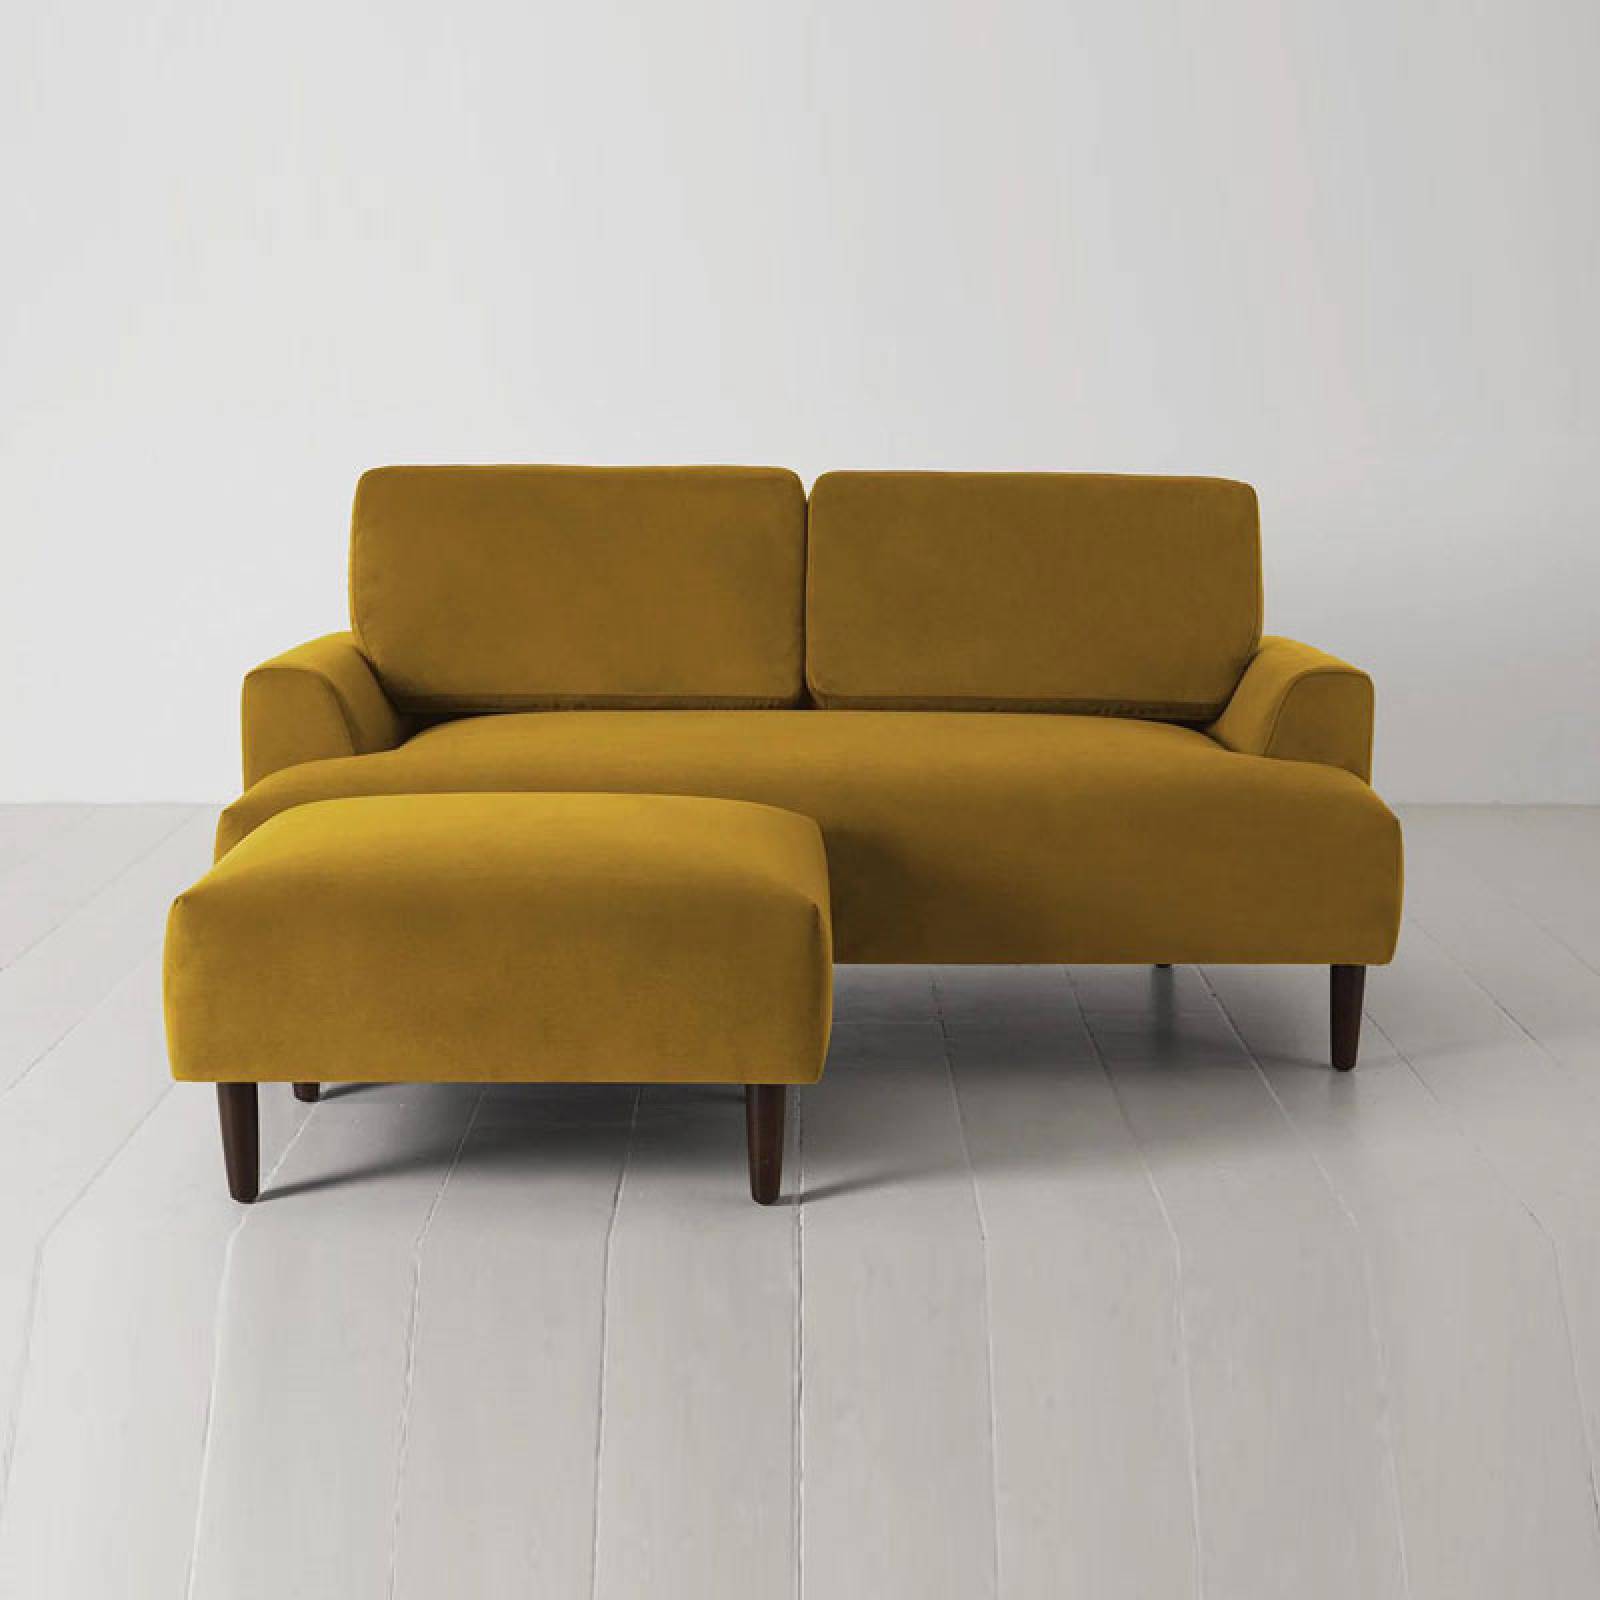 Swyft - Model 05 - 2 Seater Chaise Sofa - Left or Right